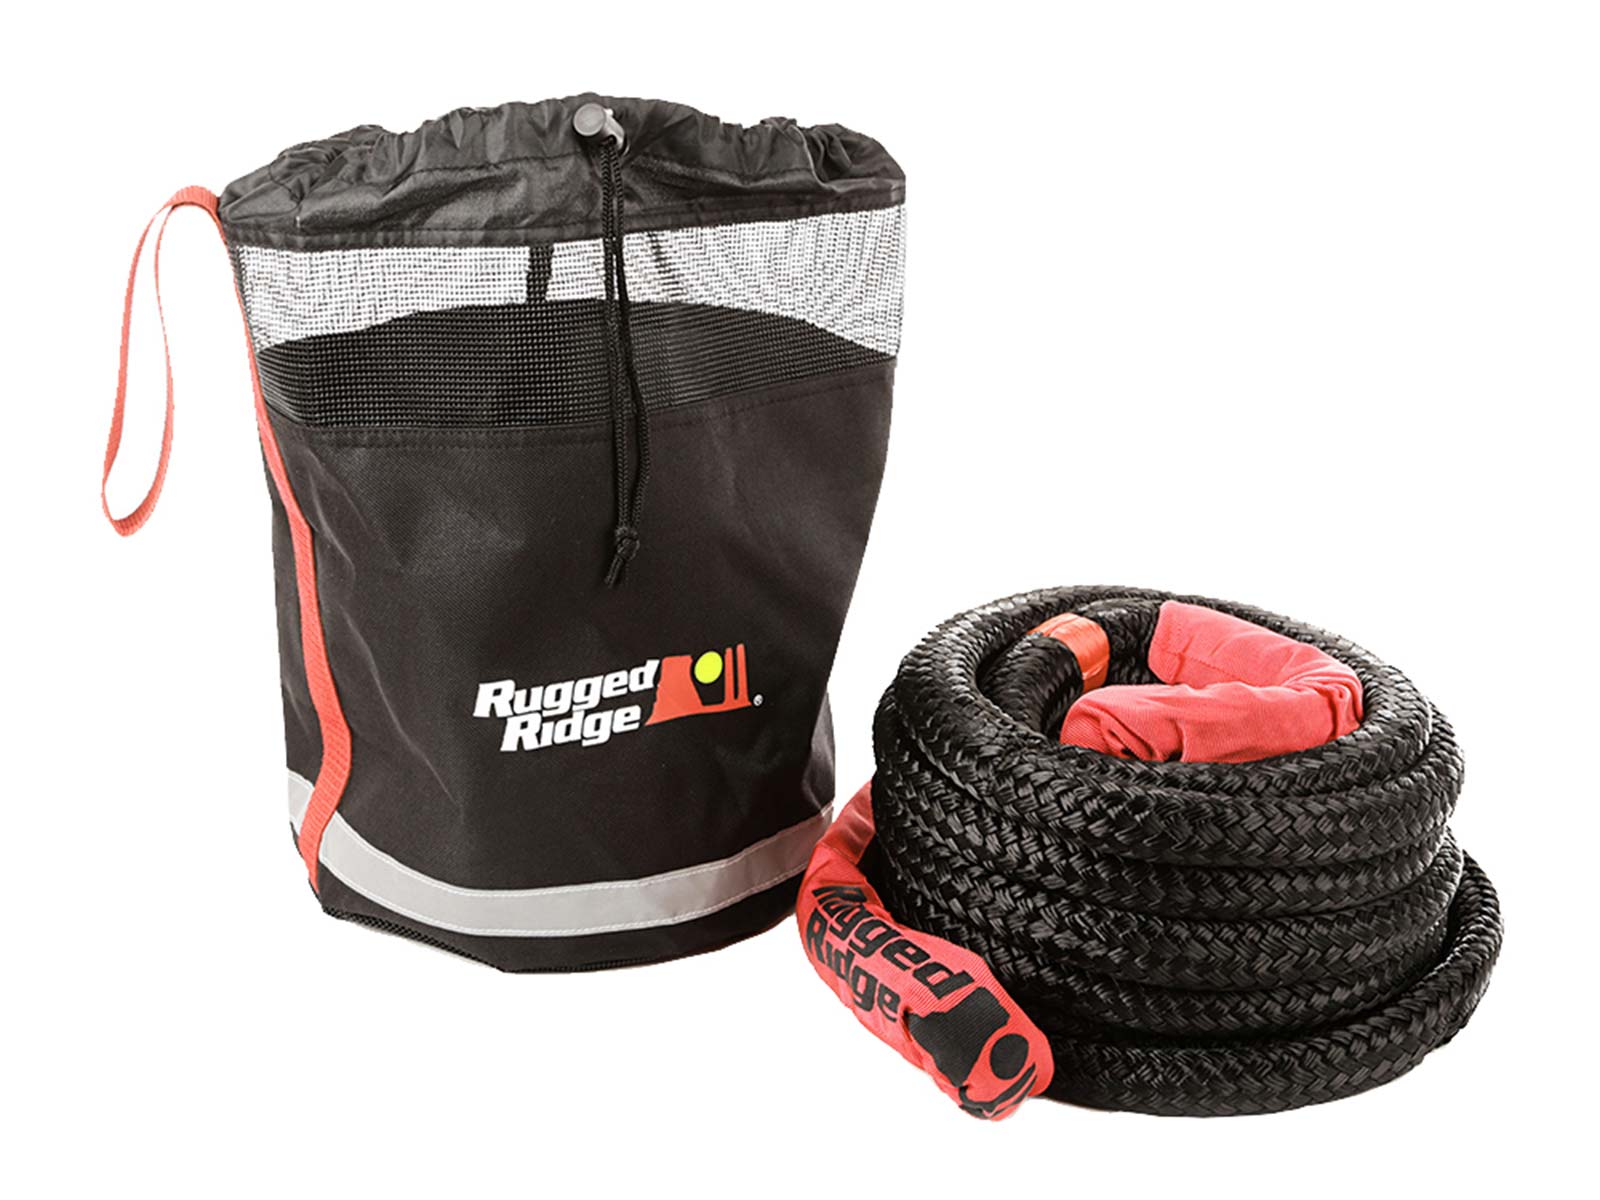 Recovery Rope Duffel Kit – Matts OffRoad Recovery